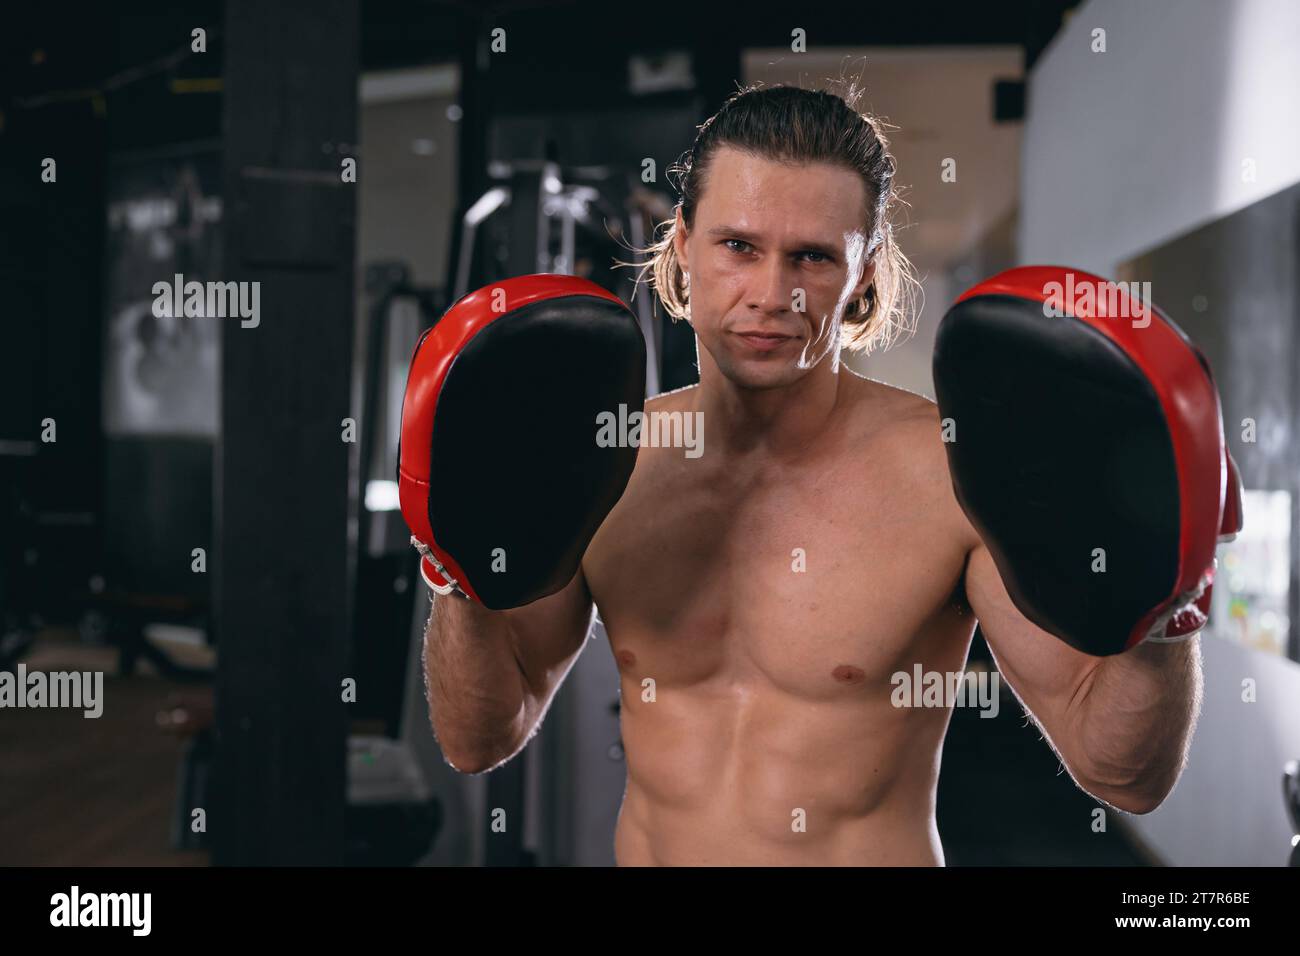 kickboxing athlete trainer portrait with boxing pad glove in fitness gym sport action Stock Photo